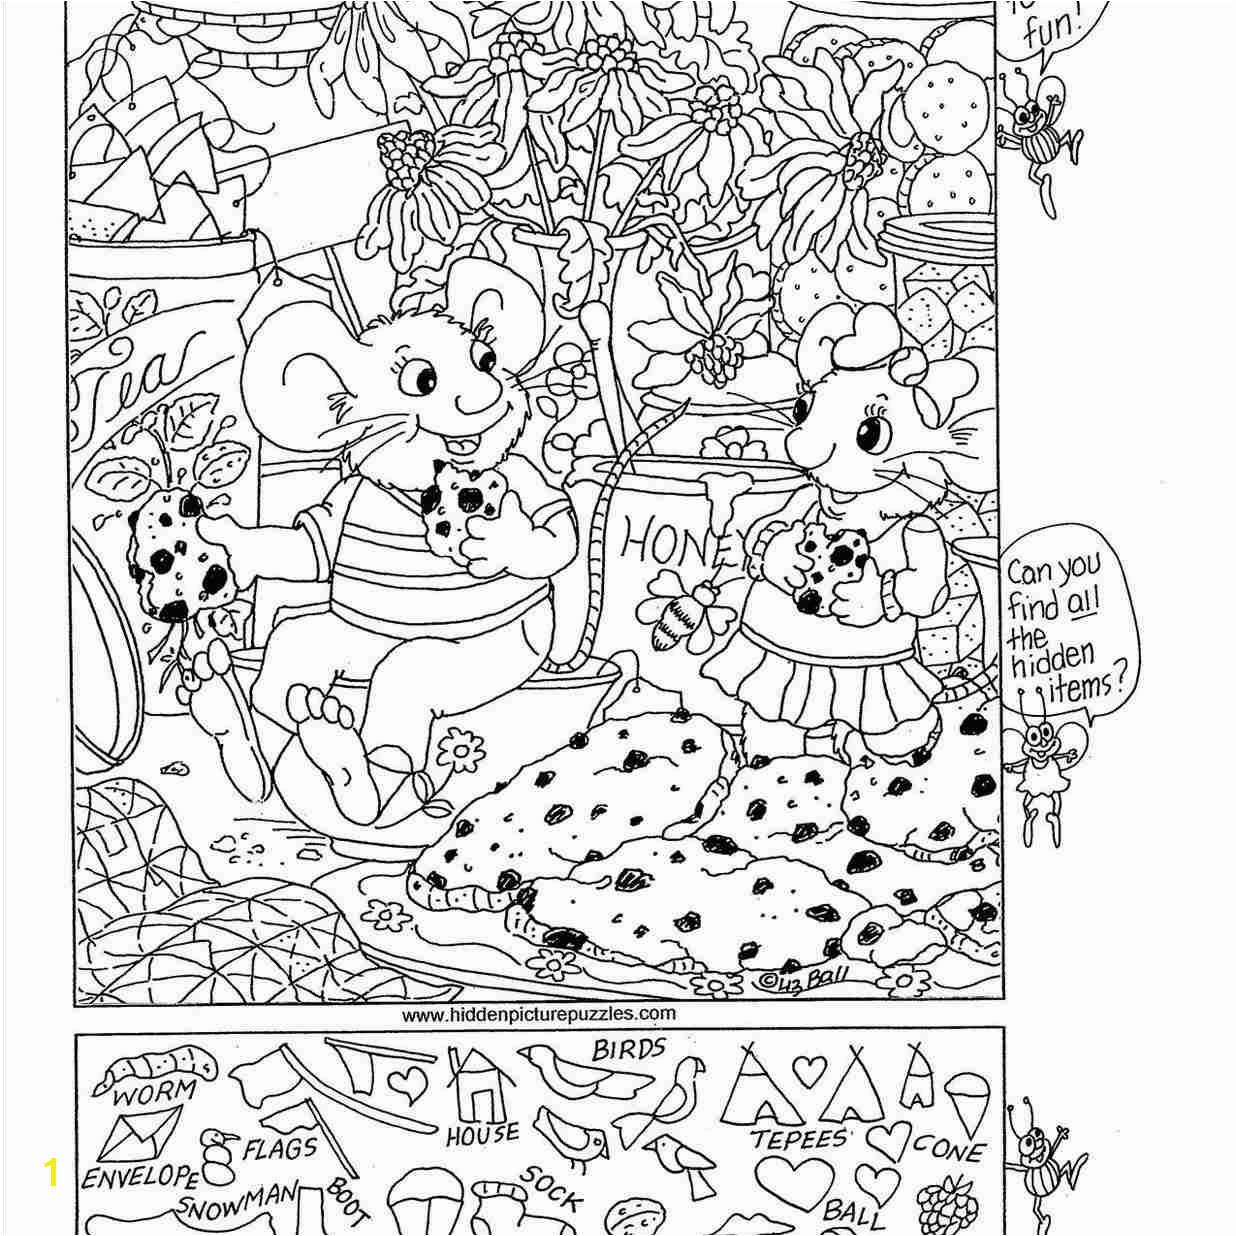 A Hidden Picture Featuring Mice in a Garden